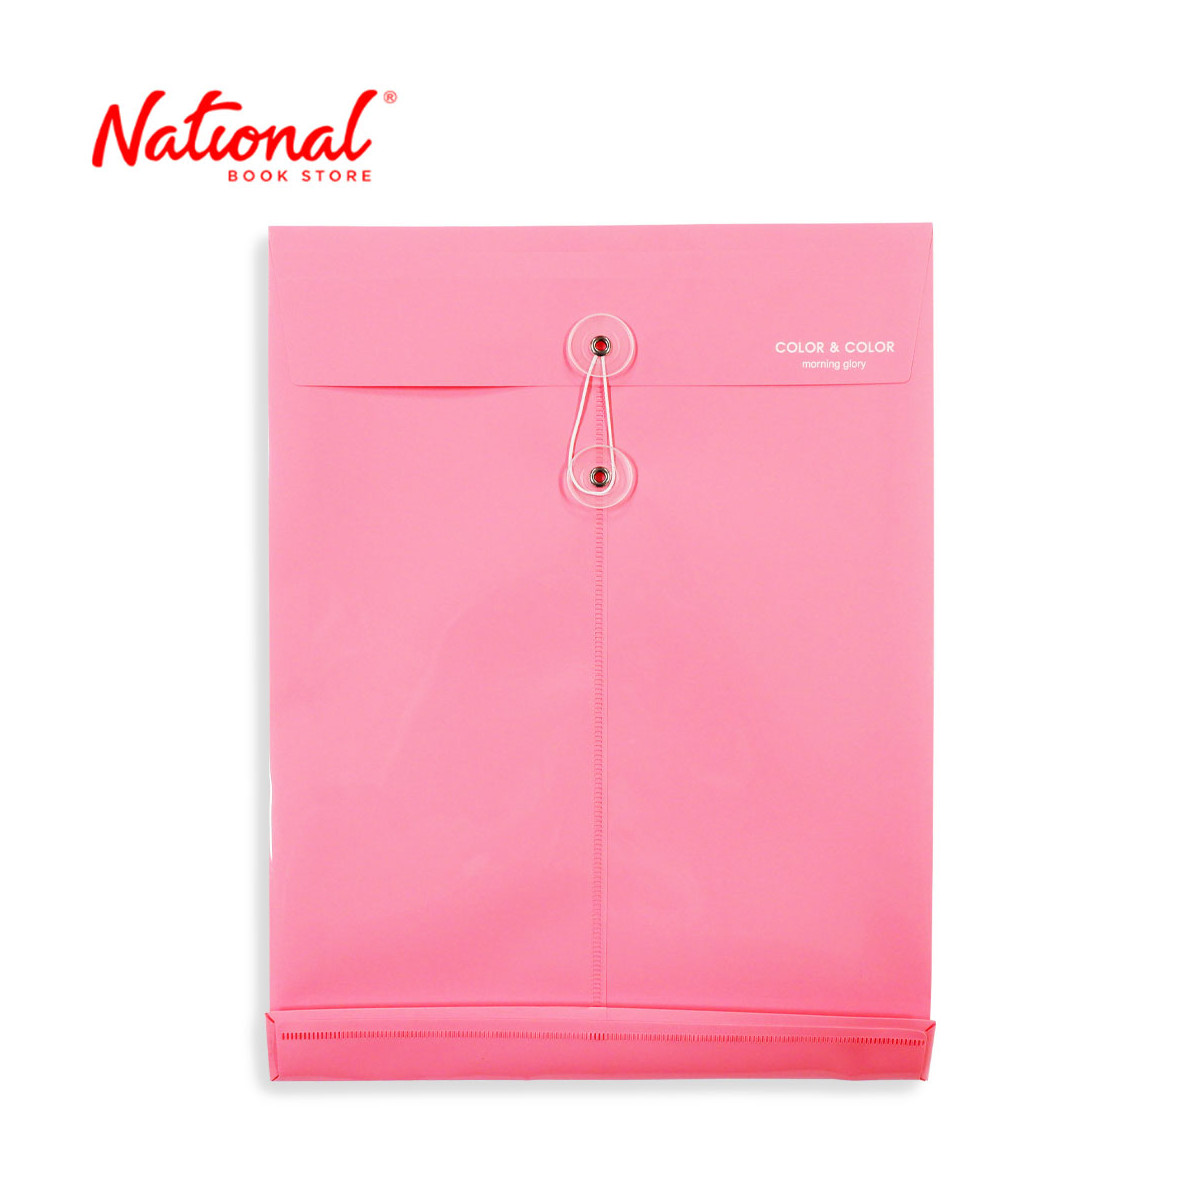 Morning Glory Plastic Envelope 51721-86919 Pink A4 Expanding String Lock Vertical - School Supplies